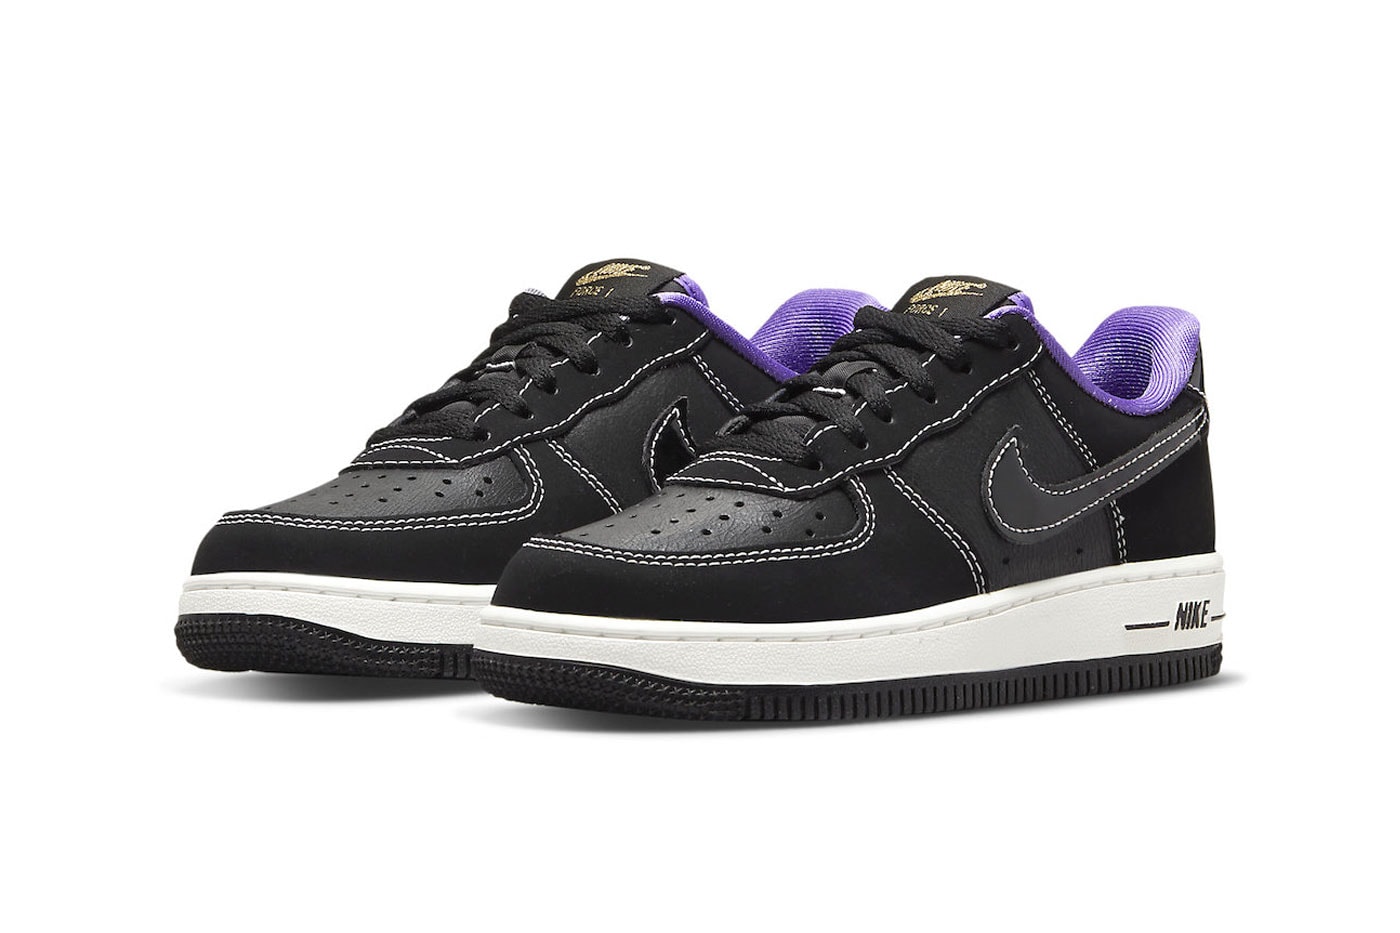 Nike Air Force 1 Low Drops in a "Lakers" Colorway DQ0301-001 los angeles lakers nubuck all-black leather anthony davis ad lebron james king james russell westbrook la